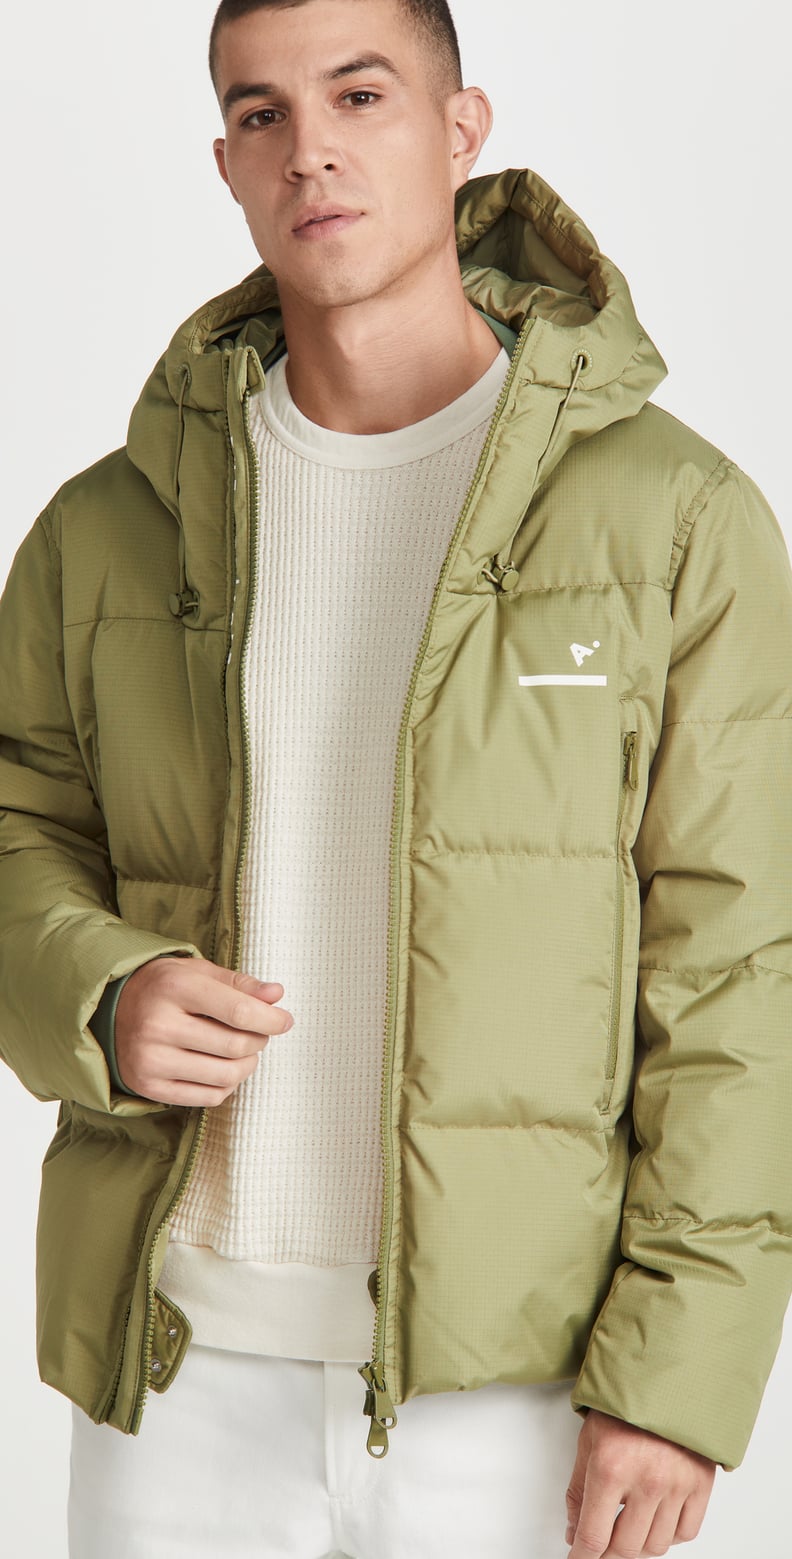 A Splurge-Worthy Must Have: The Arrivals AER Classic Puffer Jacket